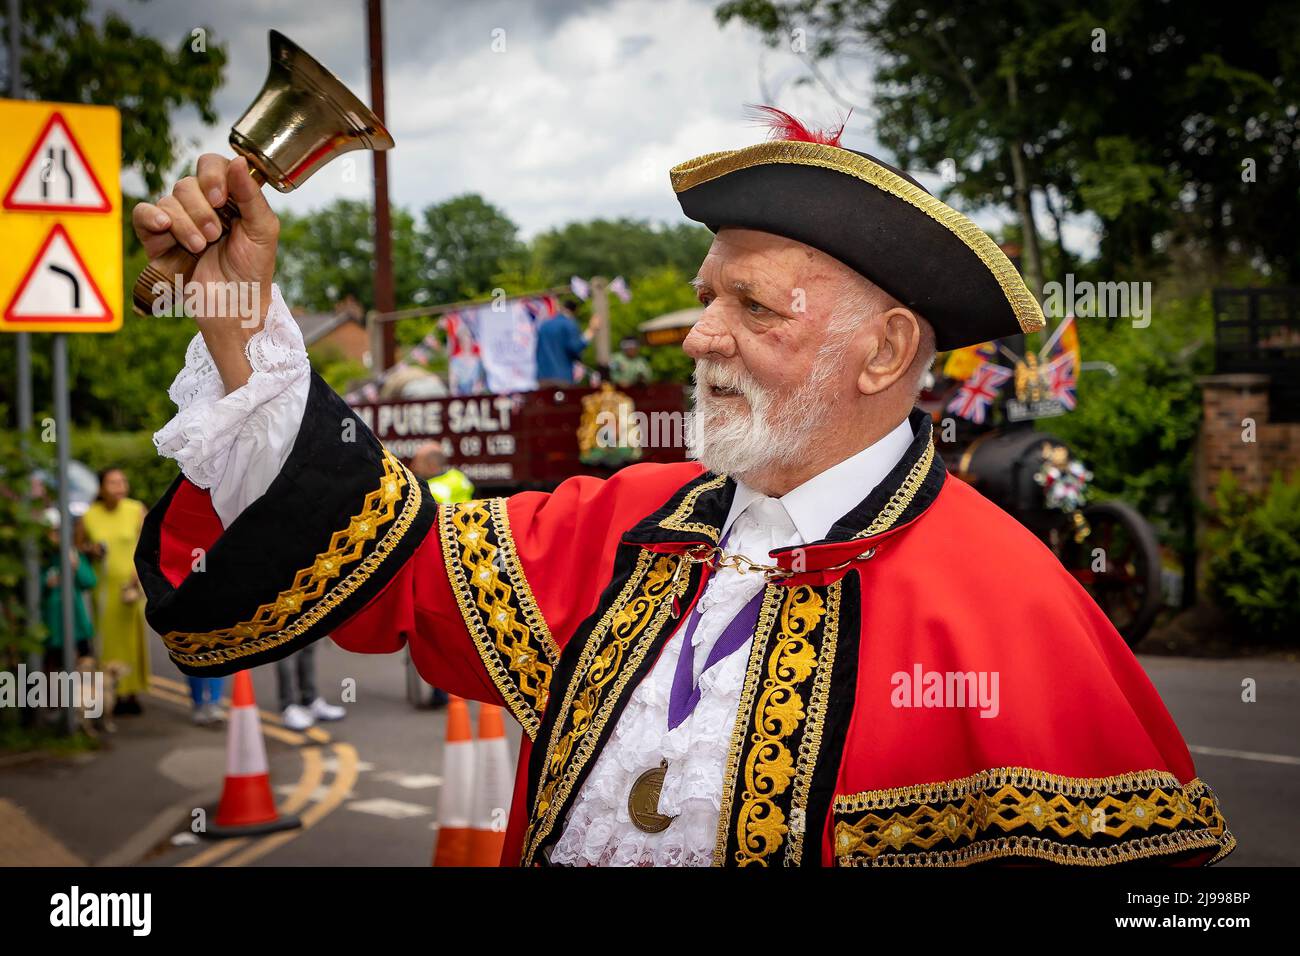 Lymm, Cheshire, UK. 21st May, 2022. Lymm Village in Cheshire held the annual Lymm May Queen Festival. Lymm Rose Queen was also crowned at this event. Those participating were dressed up and many costumes reflected the Queen's Platinum Anniversary Credit: John Hopkins/Alamy Live News Stock Photo